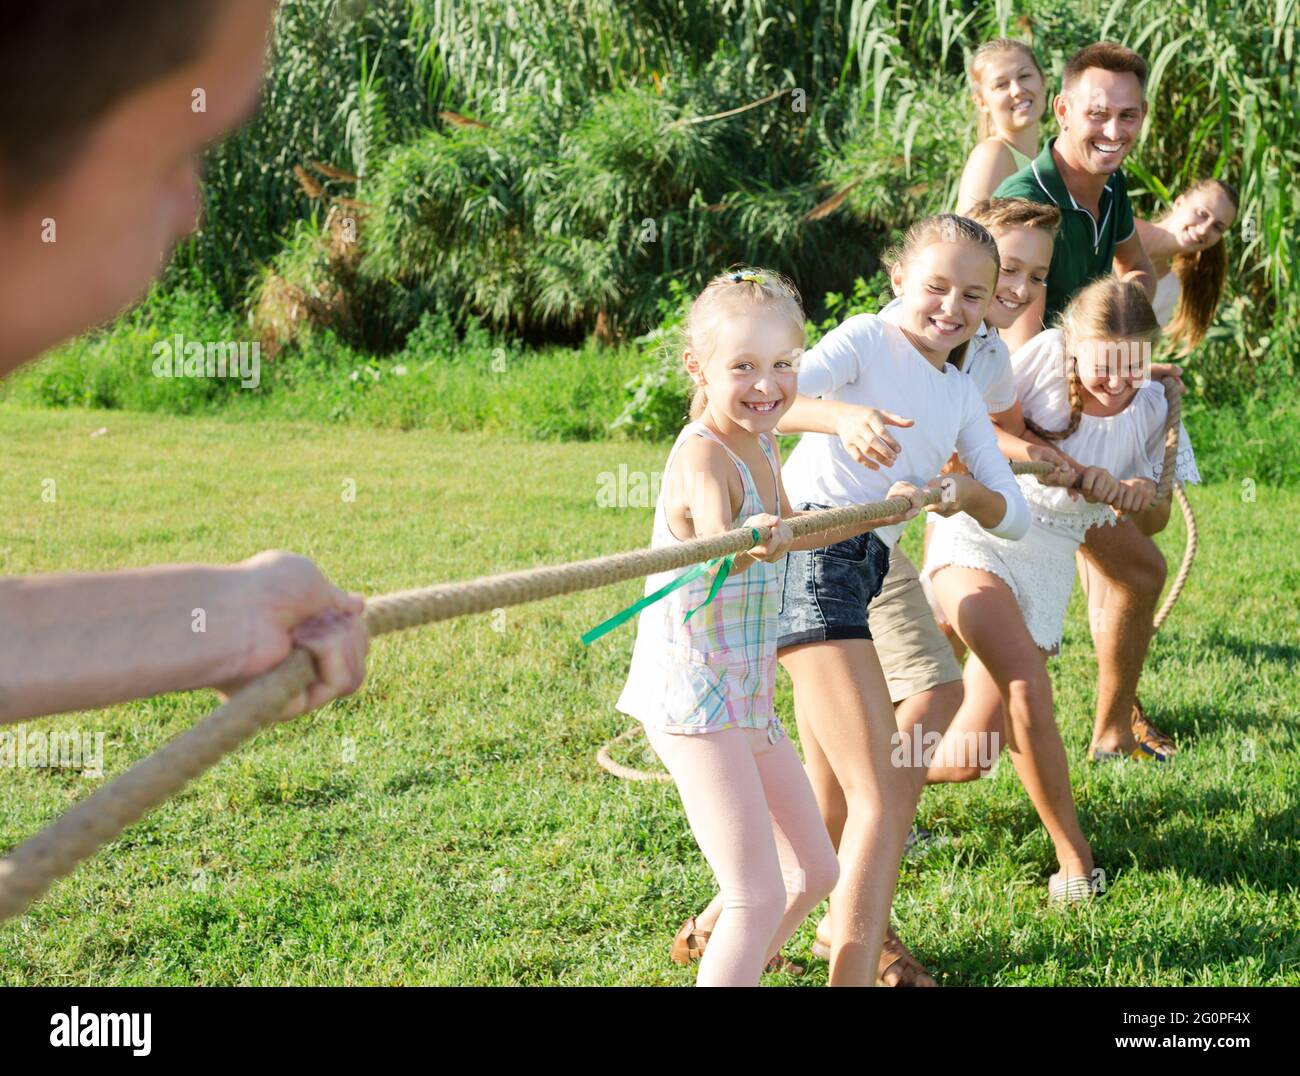 people with kids having fun outdoors pulling rope Stock Photo